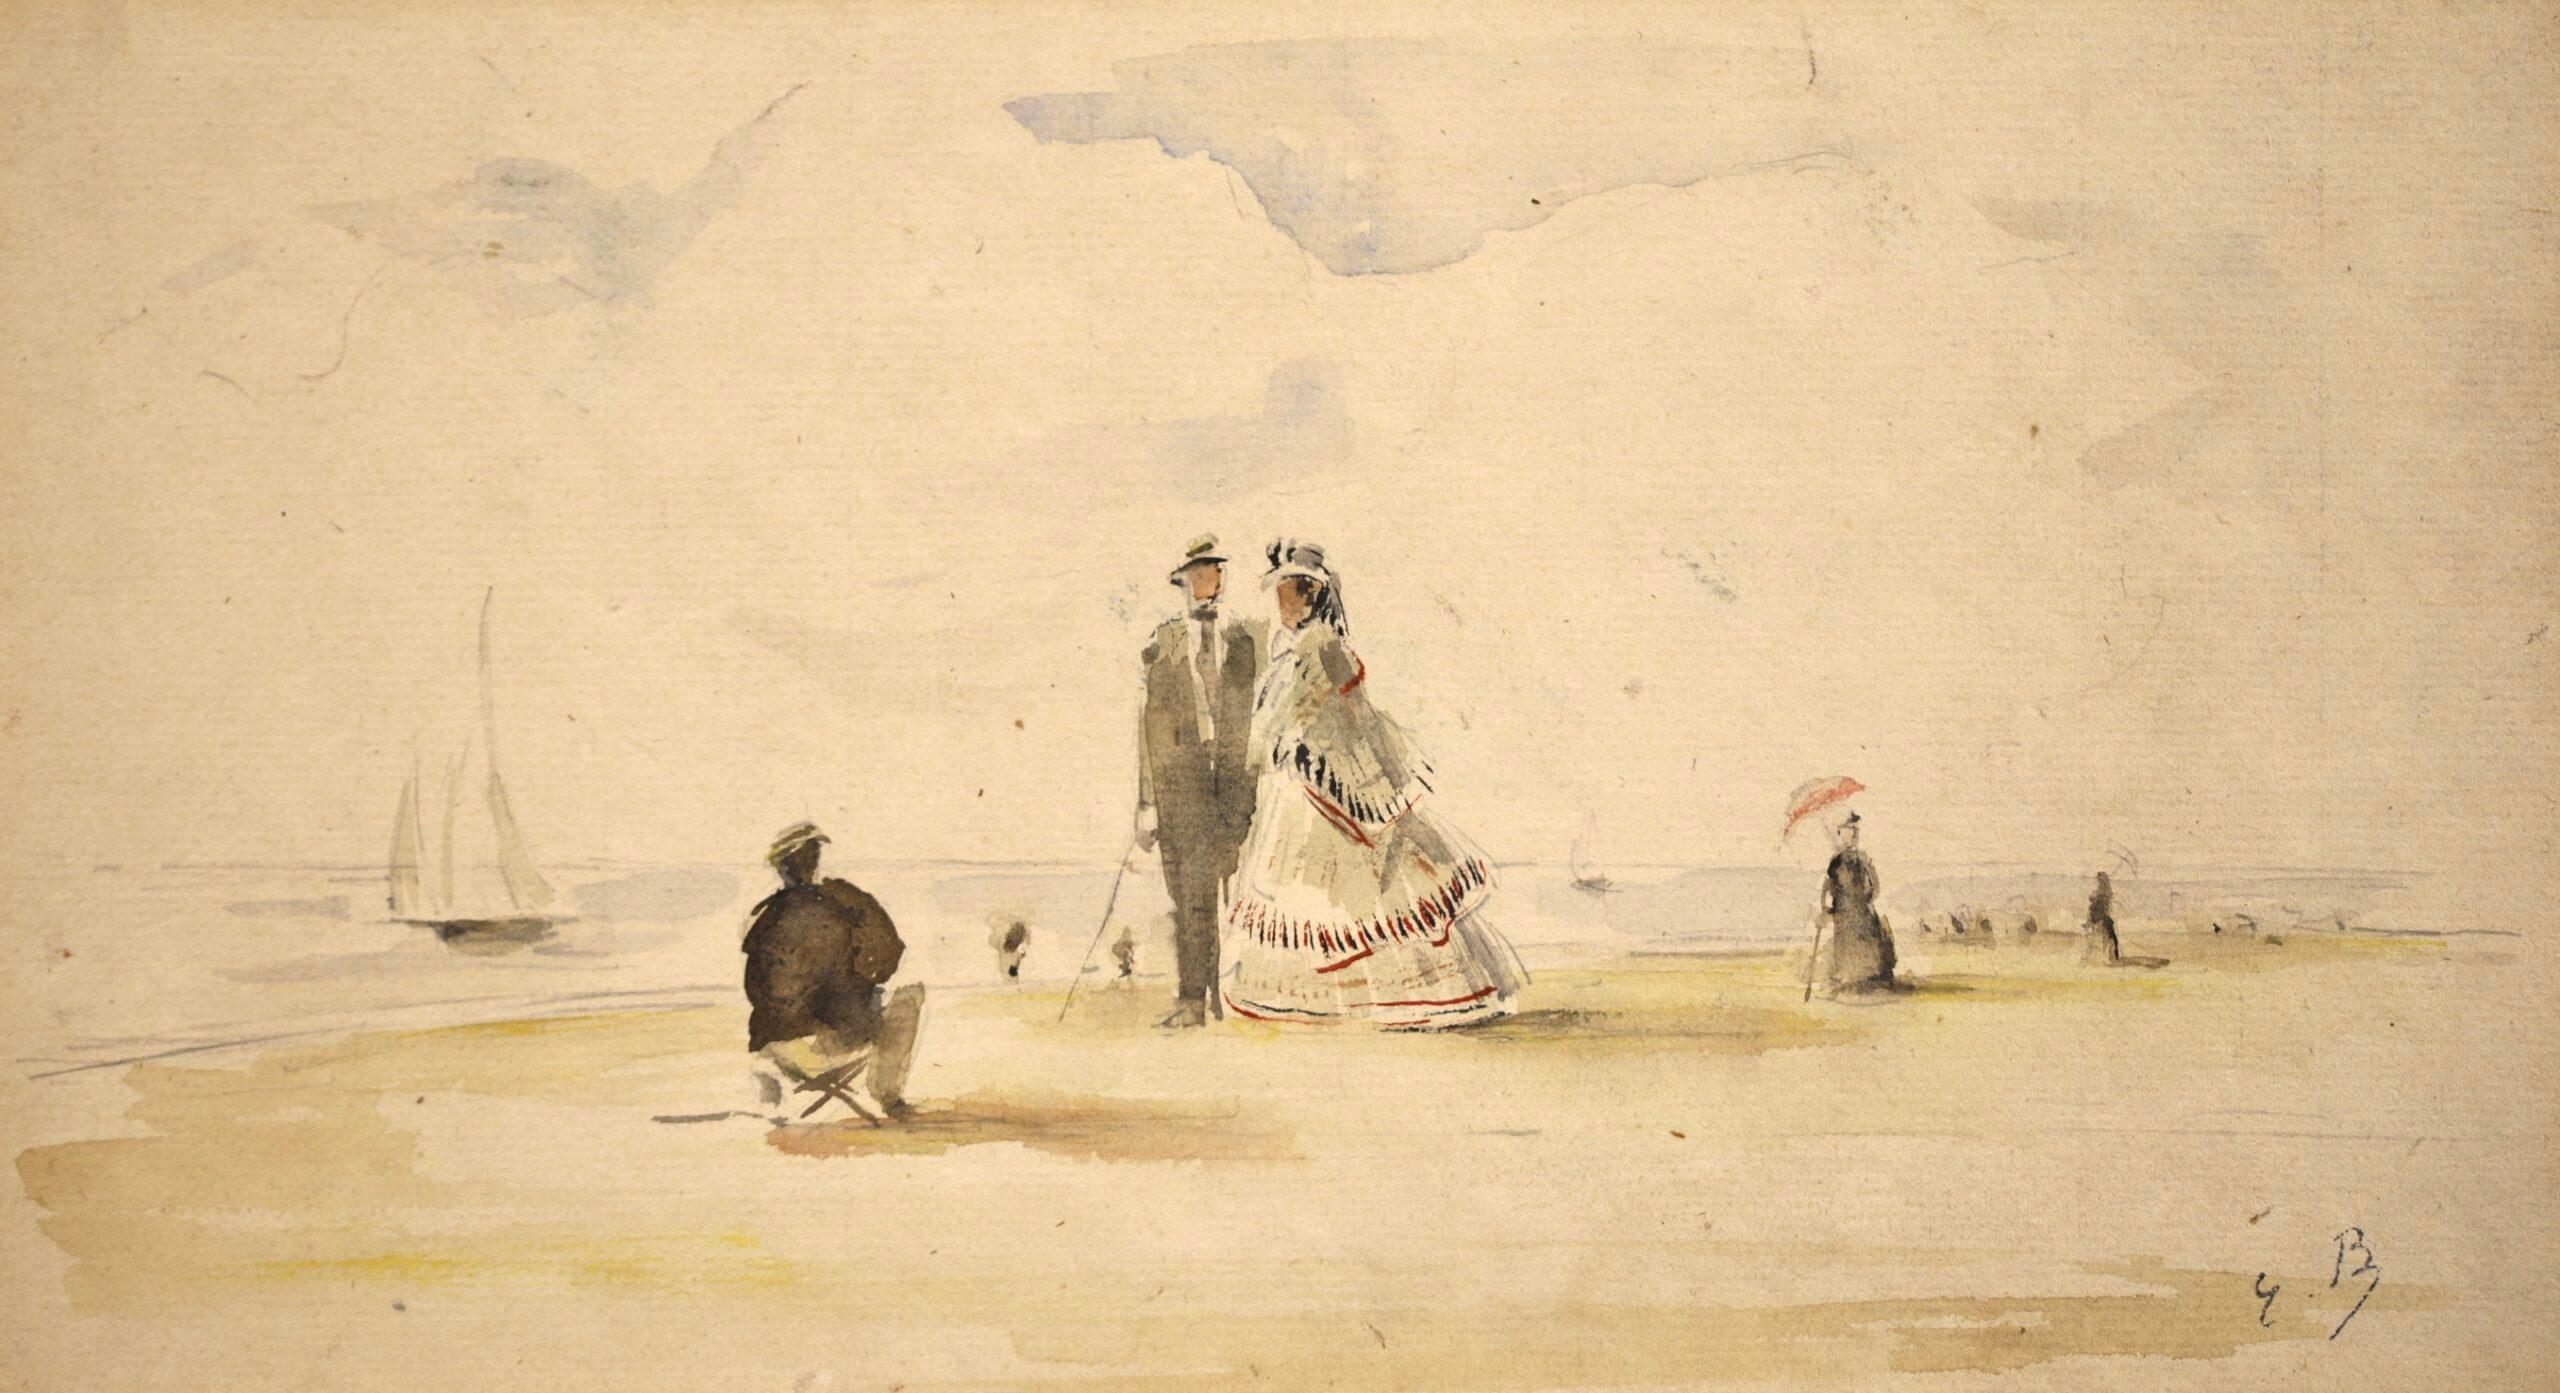 Signed watercolour on paper landscape circa 1865 by French impressionist painter Eugene Boudin. This work depicts an artist painting a portrait of an elegant couple on the beach at Deauville. The couple pose on the beach as they are being painted by